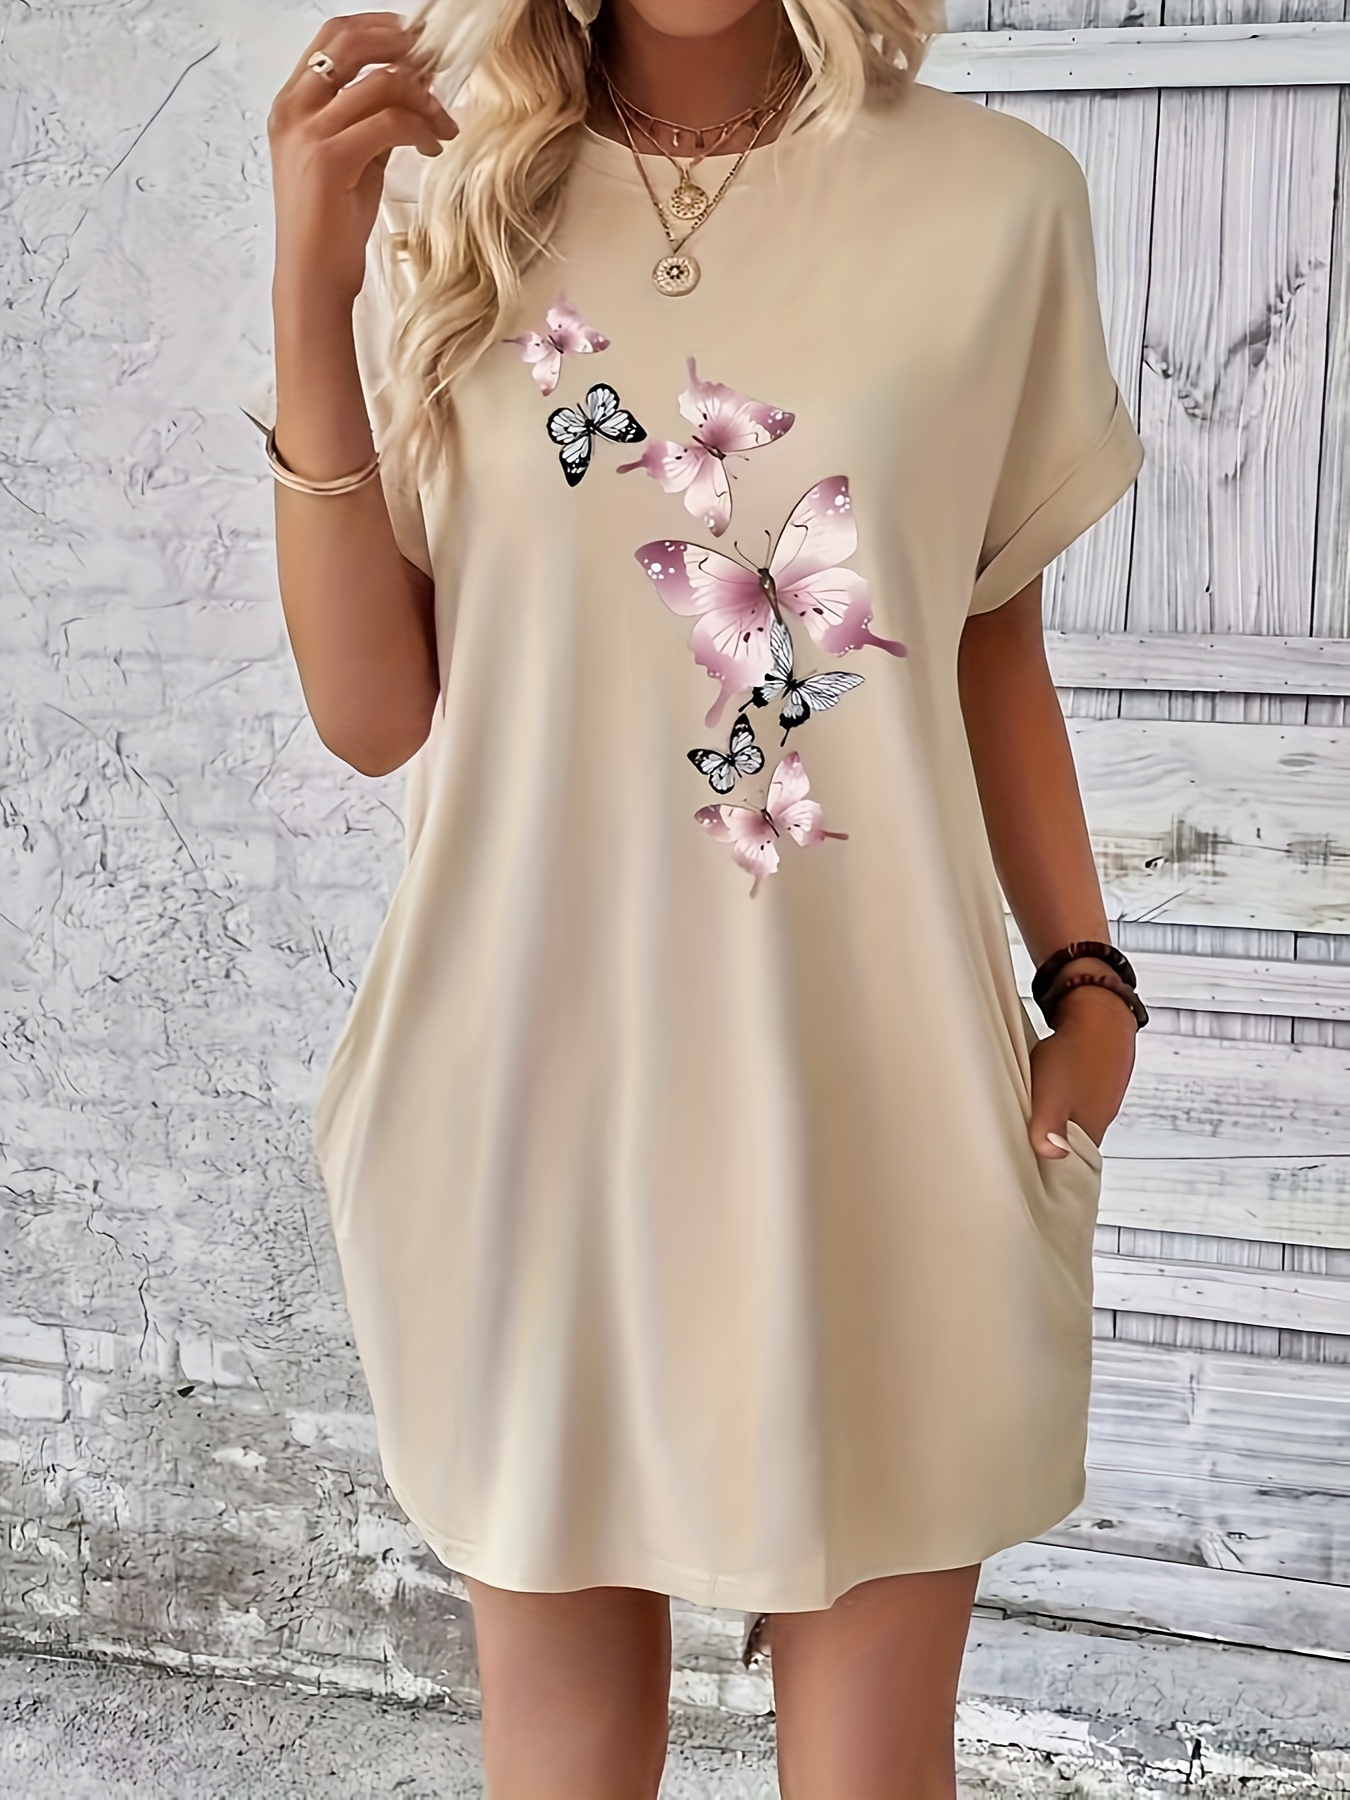 floral print crew neck dress casual short sleeve dress for spring summer womens clothing details 2